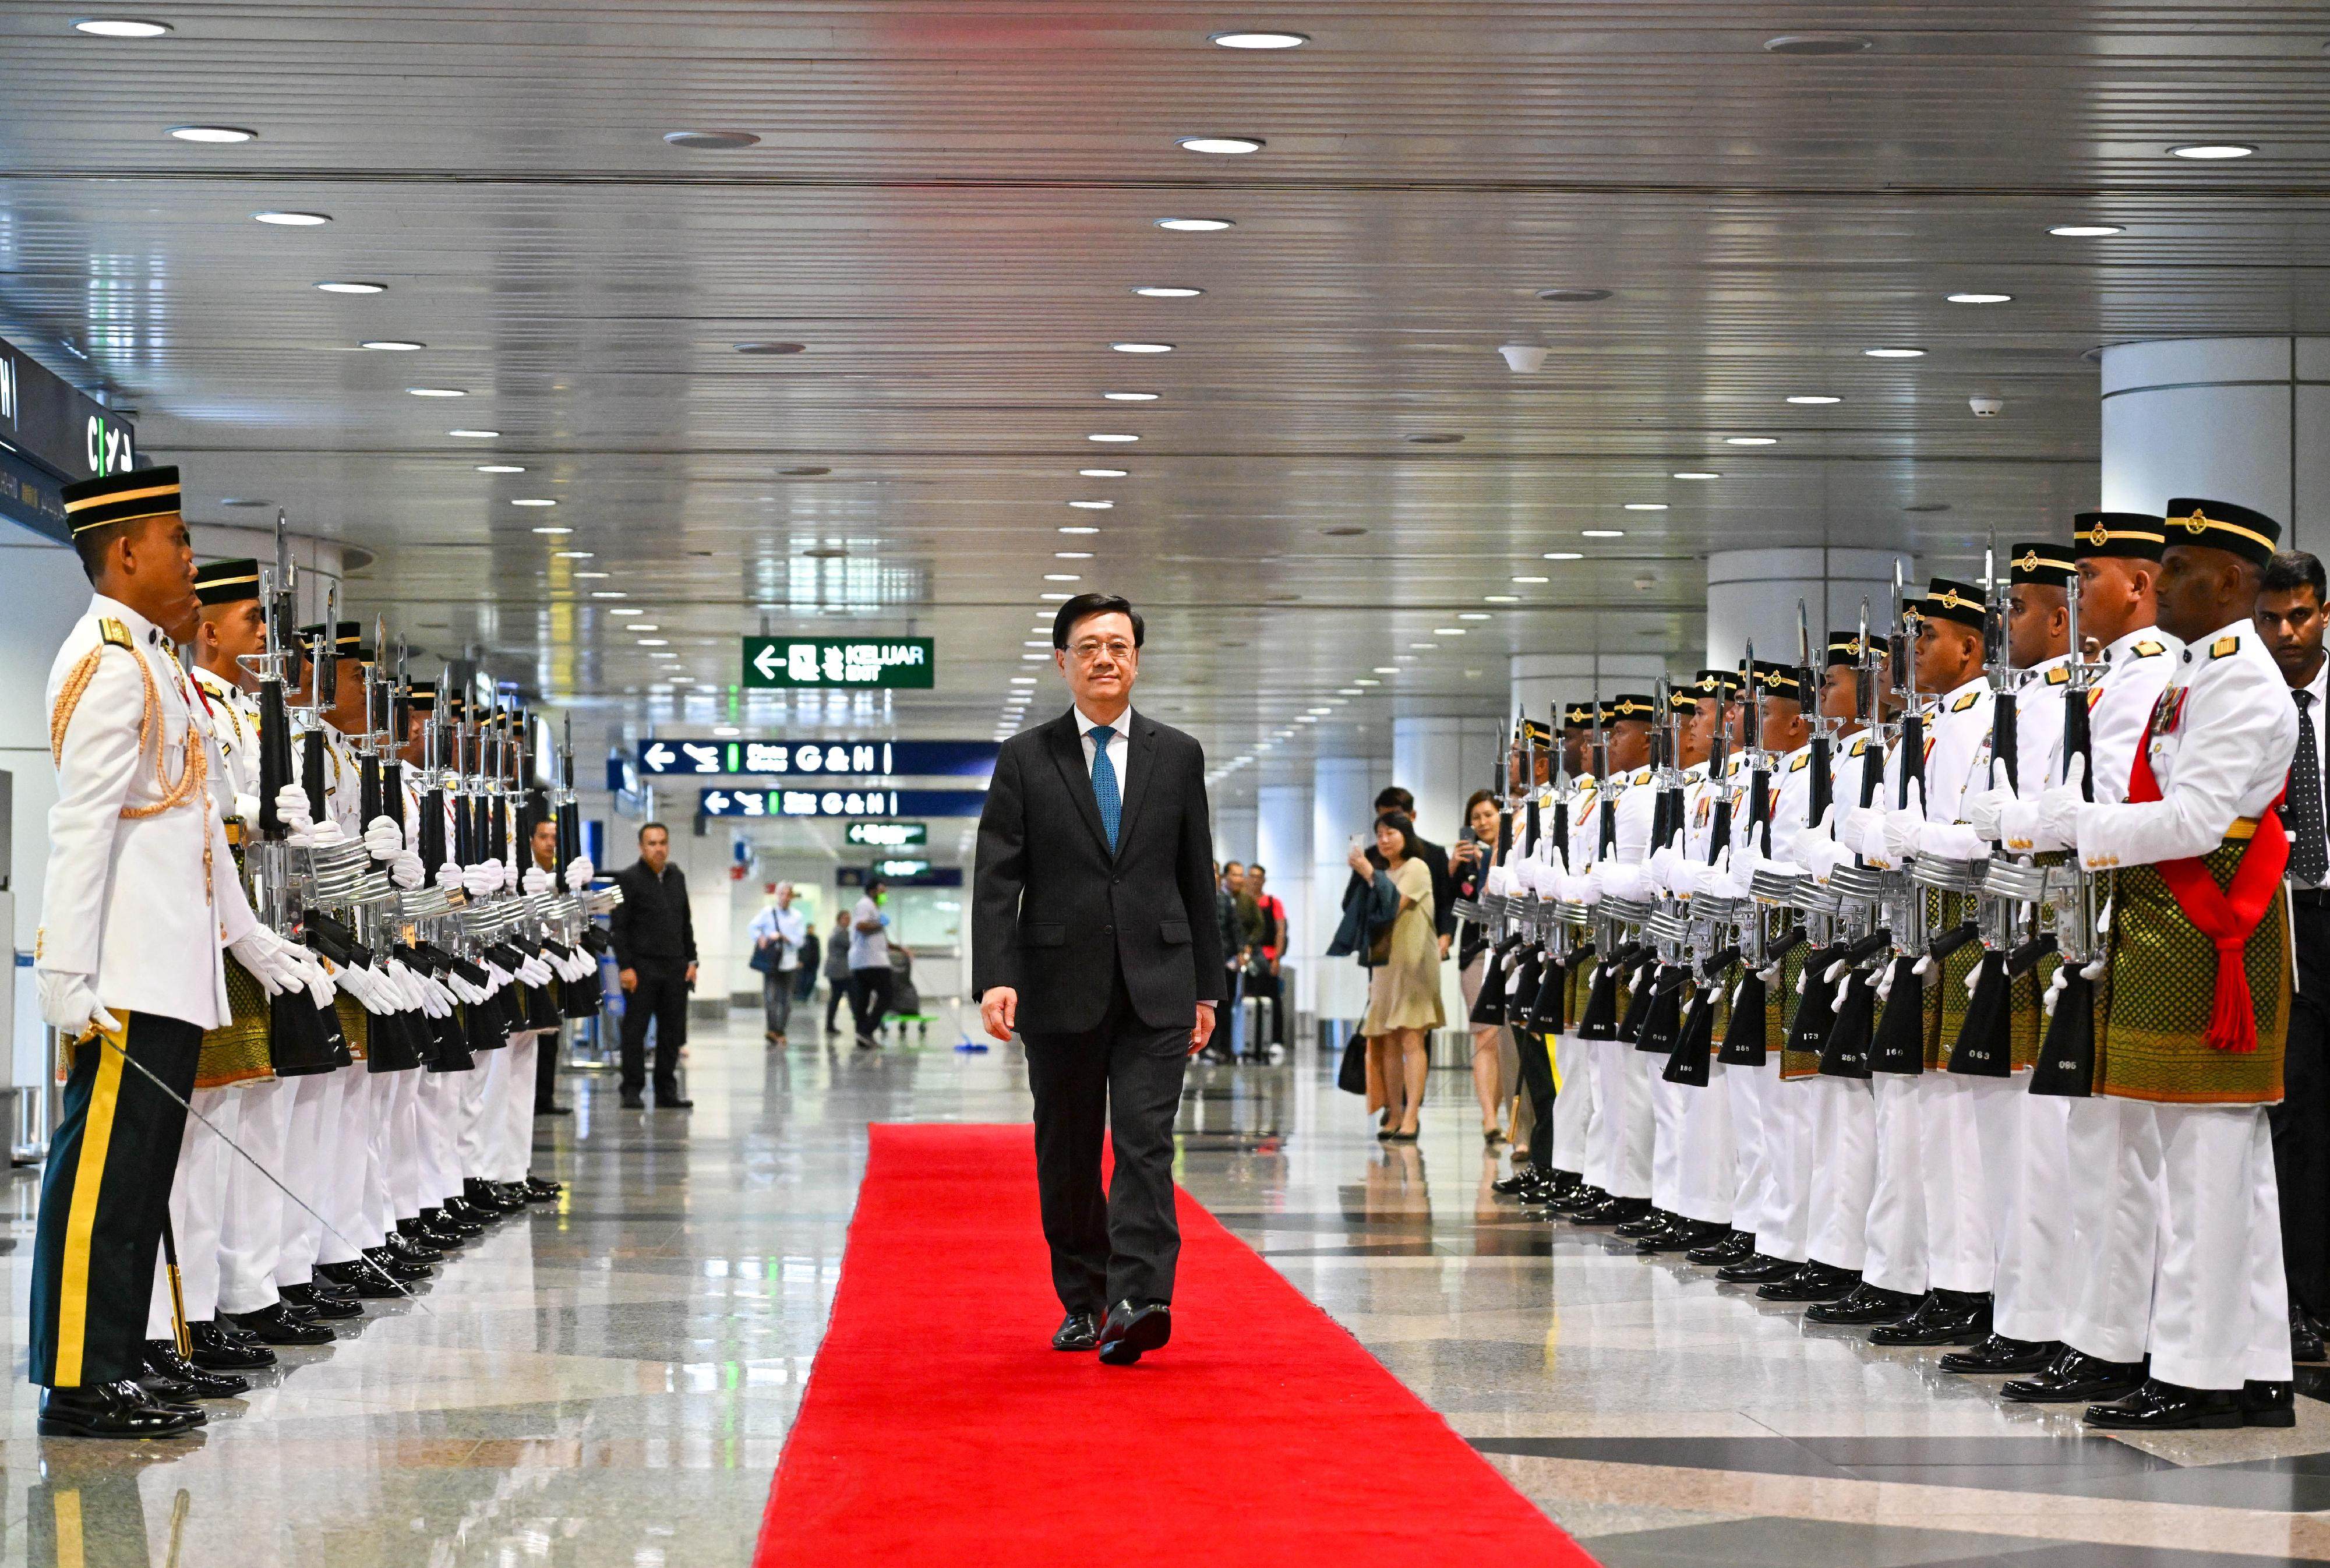 Chief Executive John Lee Ka-chiu receives a red carpet reception upon his arrival in Kuala Lumpur on July 27. Lee and his administration have made attracting global talent and promoting Hong Kong abroad high priorities, but many pressing concerns about life in the city remain unaddressed. Photo: Information Services Department handout